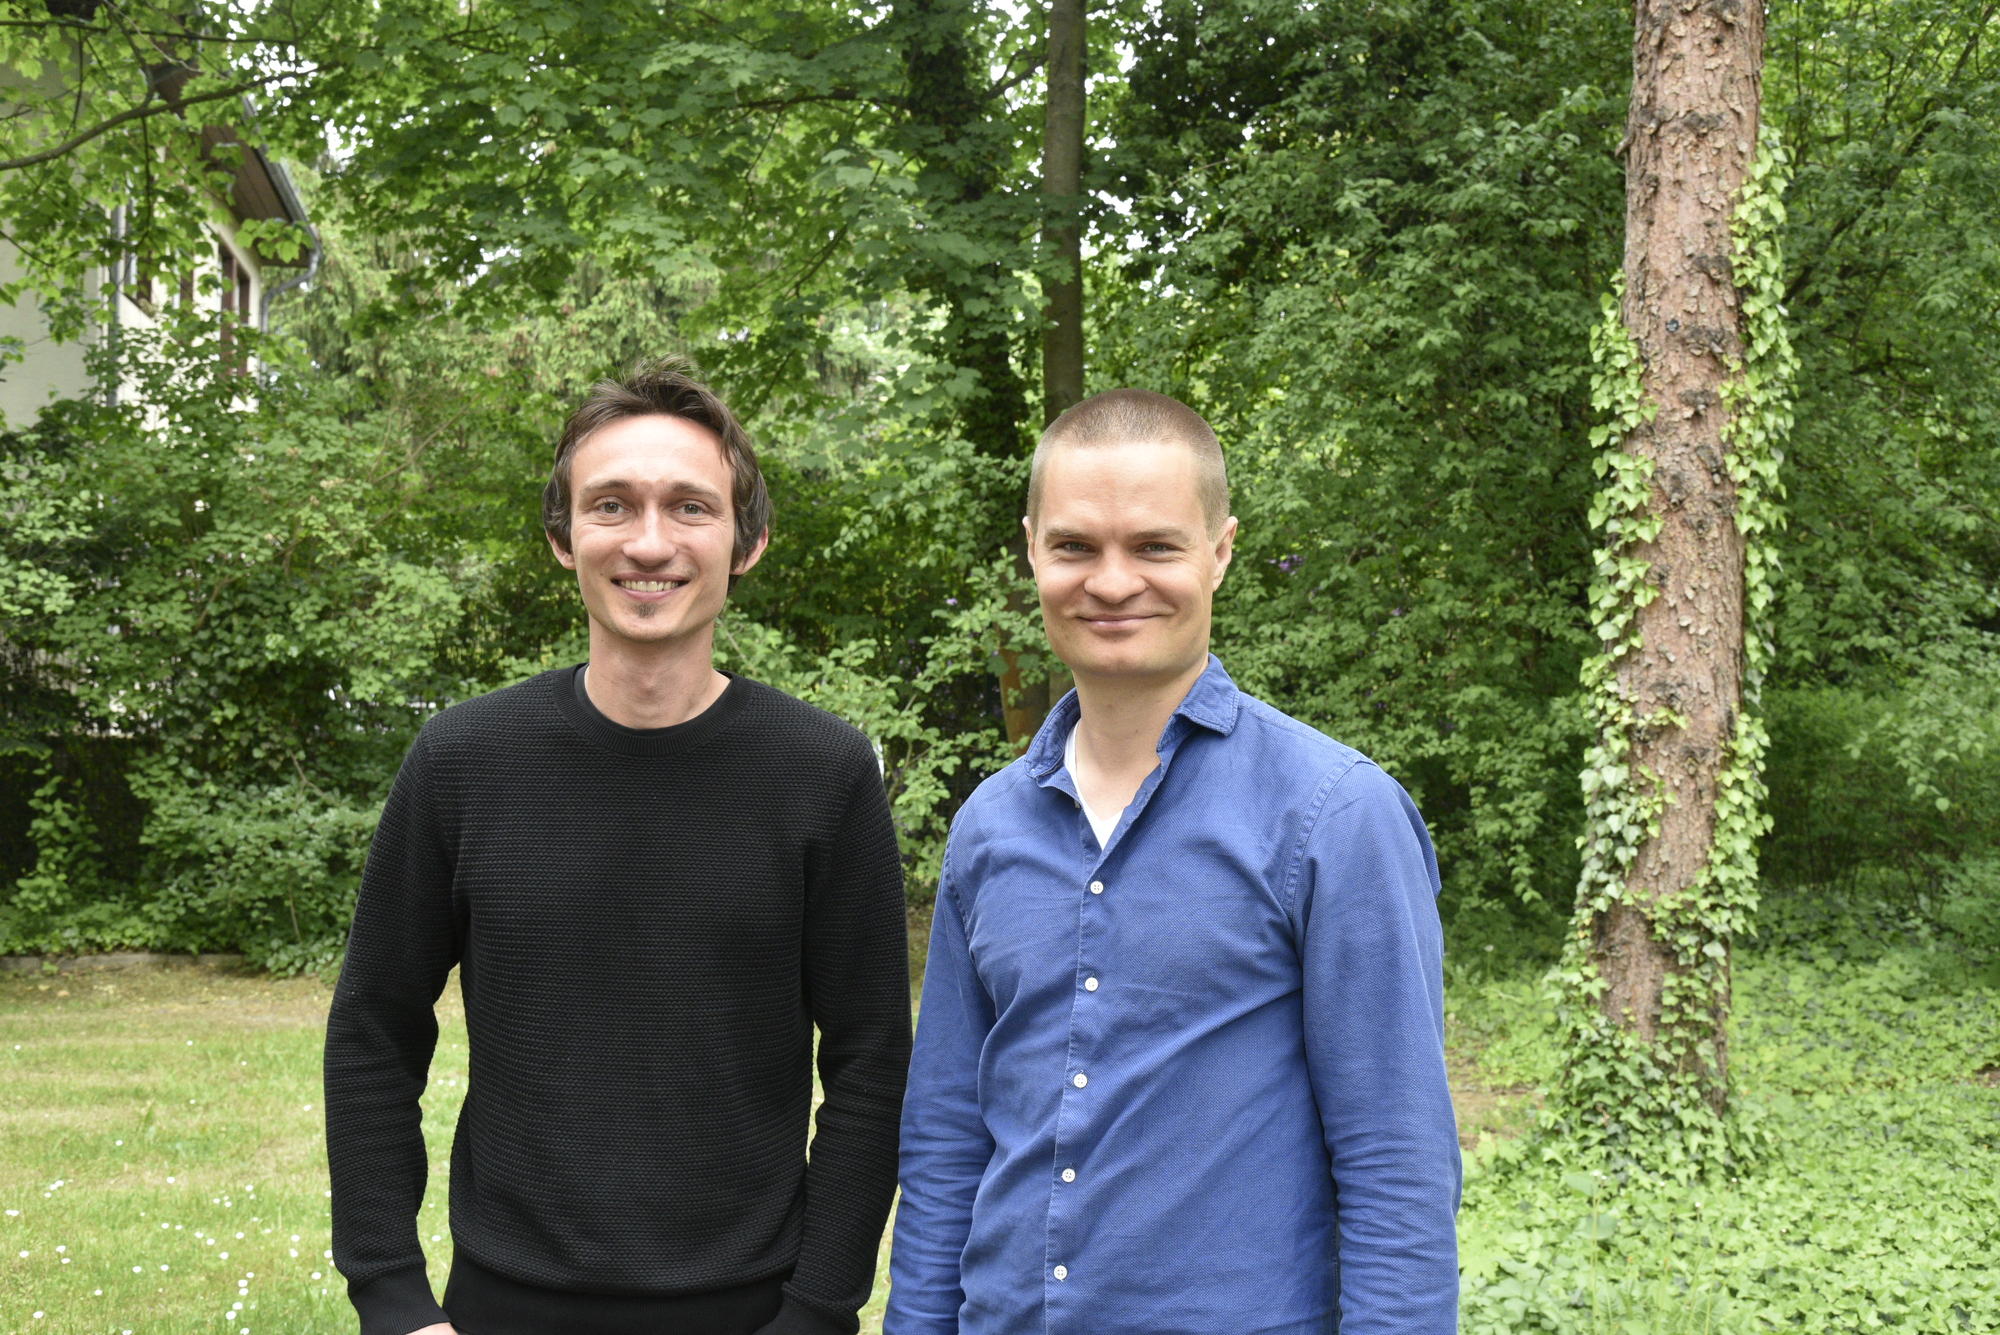 Tassilo Weber and Roope Kärki presented their ideas for the “Yolife” app.